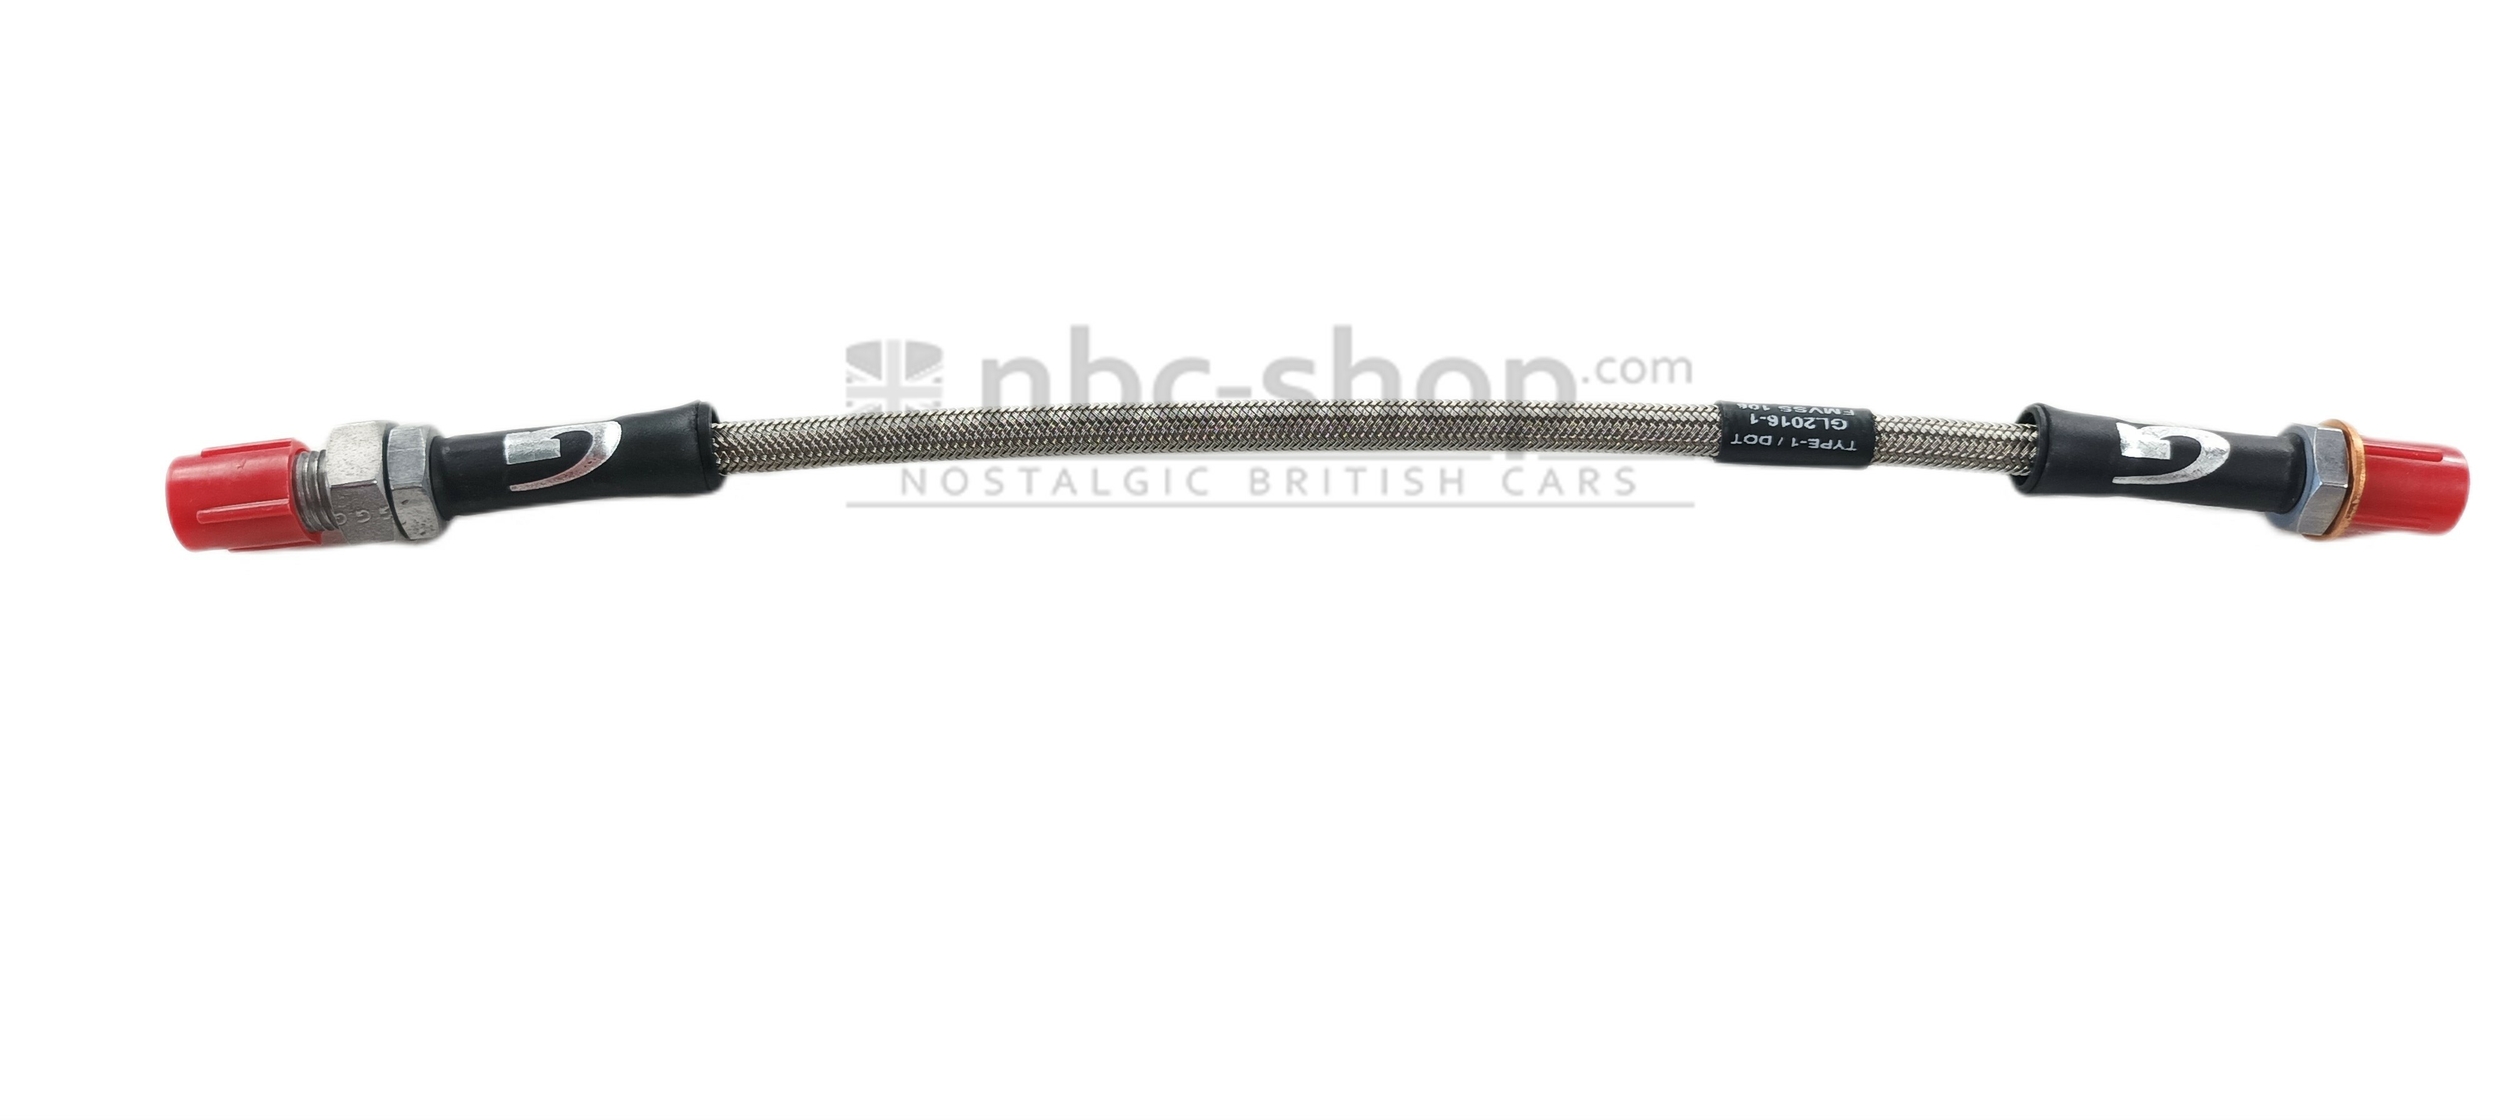 GBH159 DURITE DE FREIN ARRIERE MGB STAINLESS STEEL nbc-shop 1